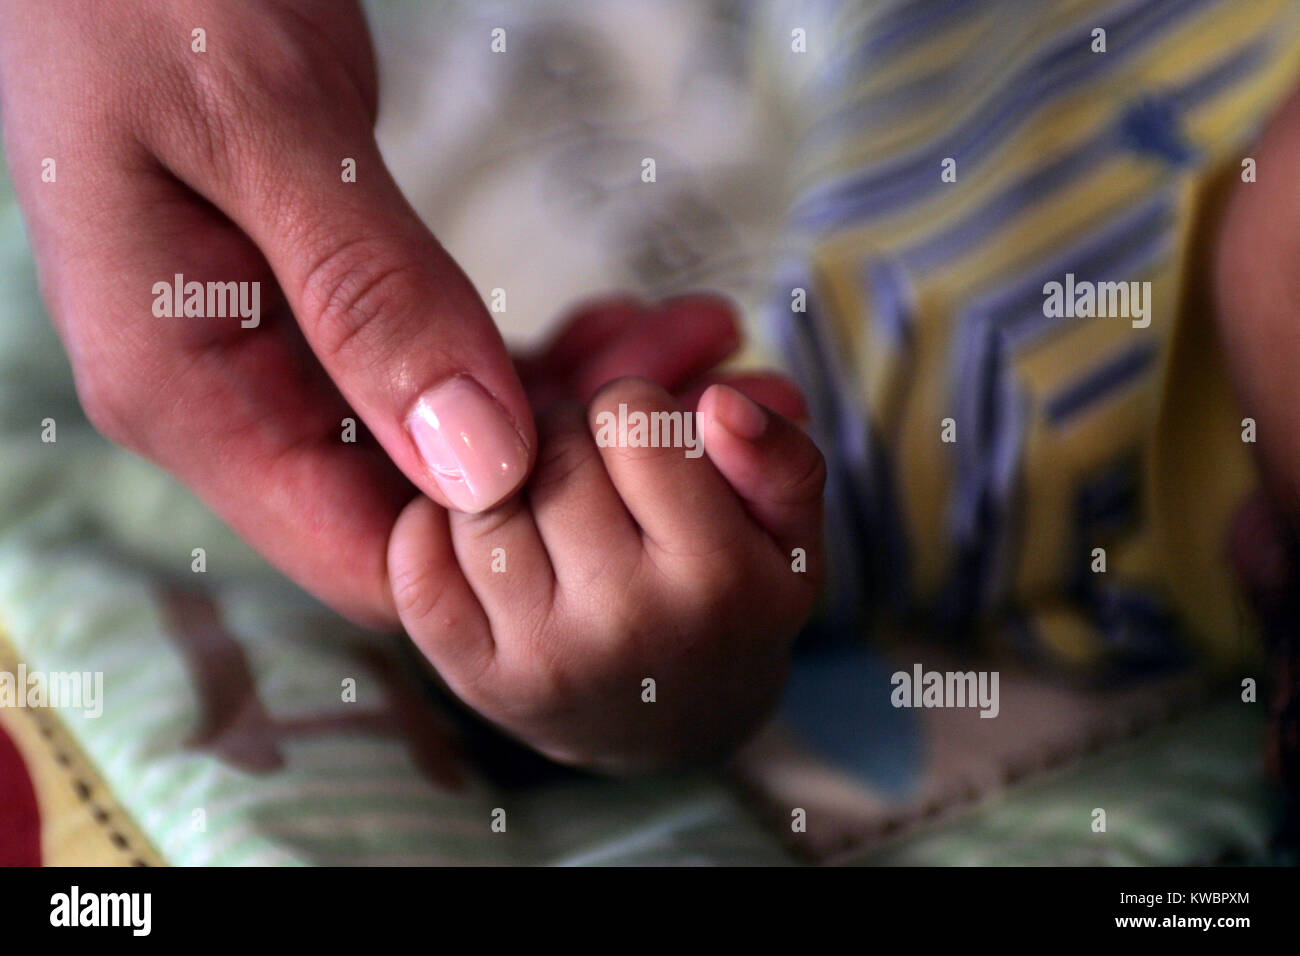 Infant holding Mother's hand Stock Photo